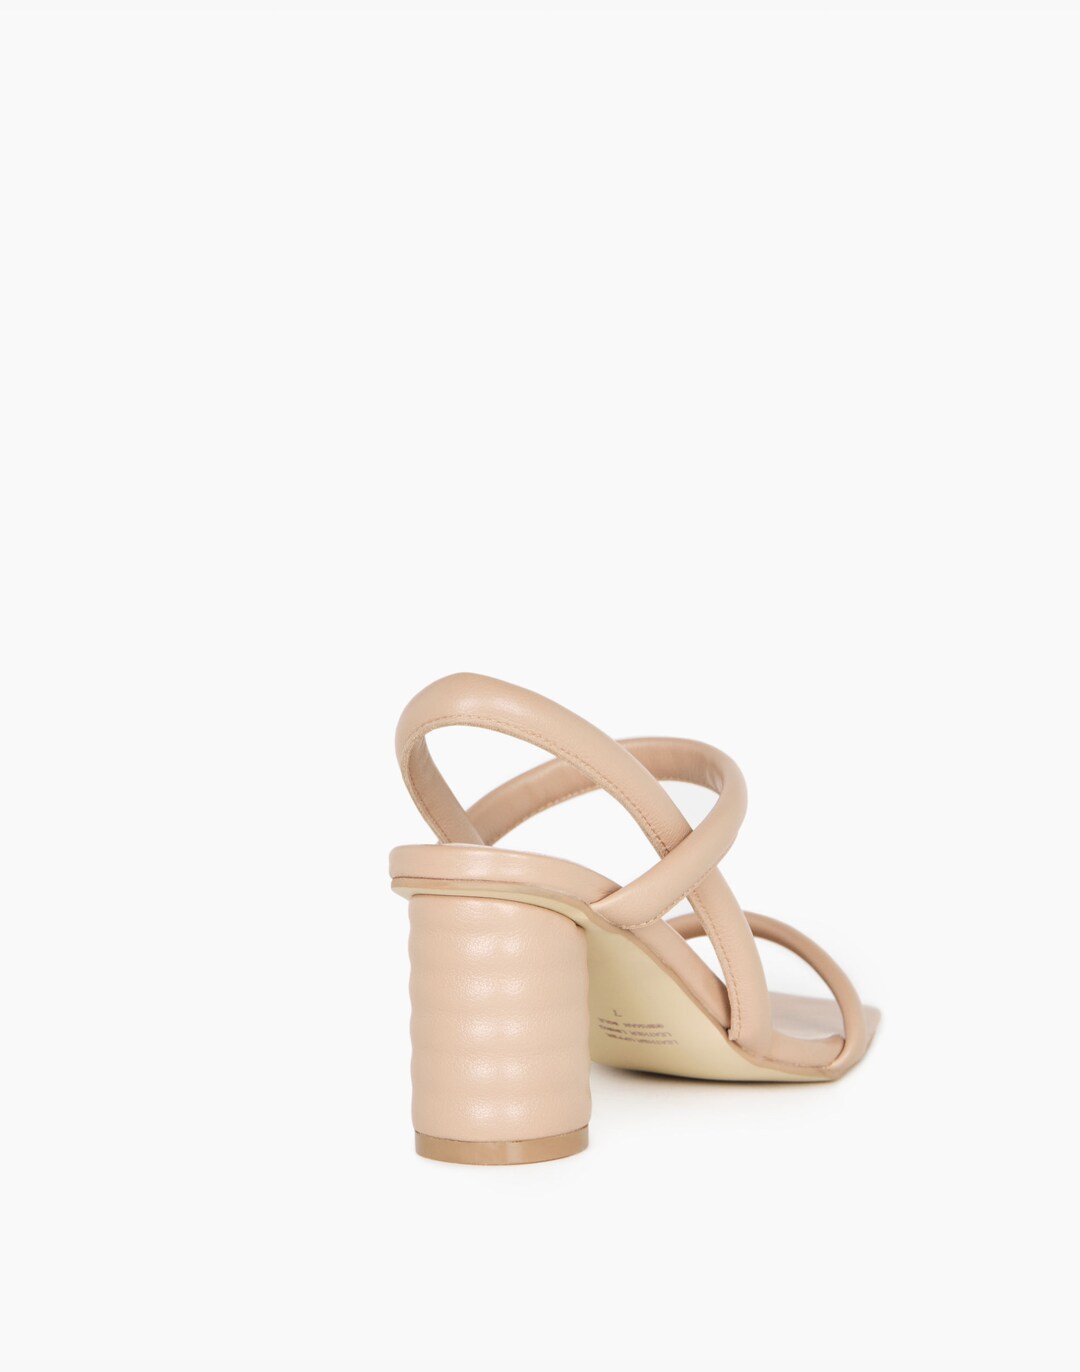 Intentionally Blank Leather Kifton Sandals